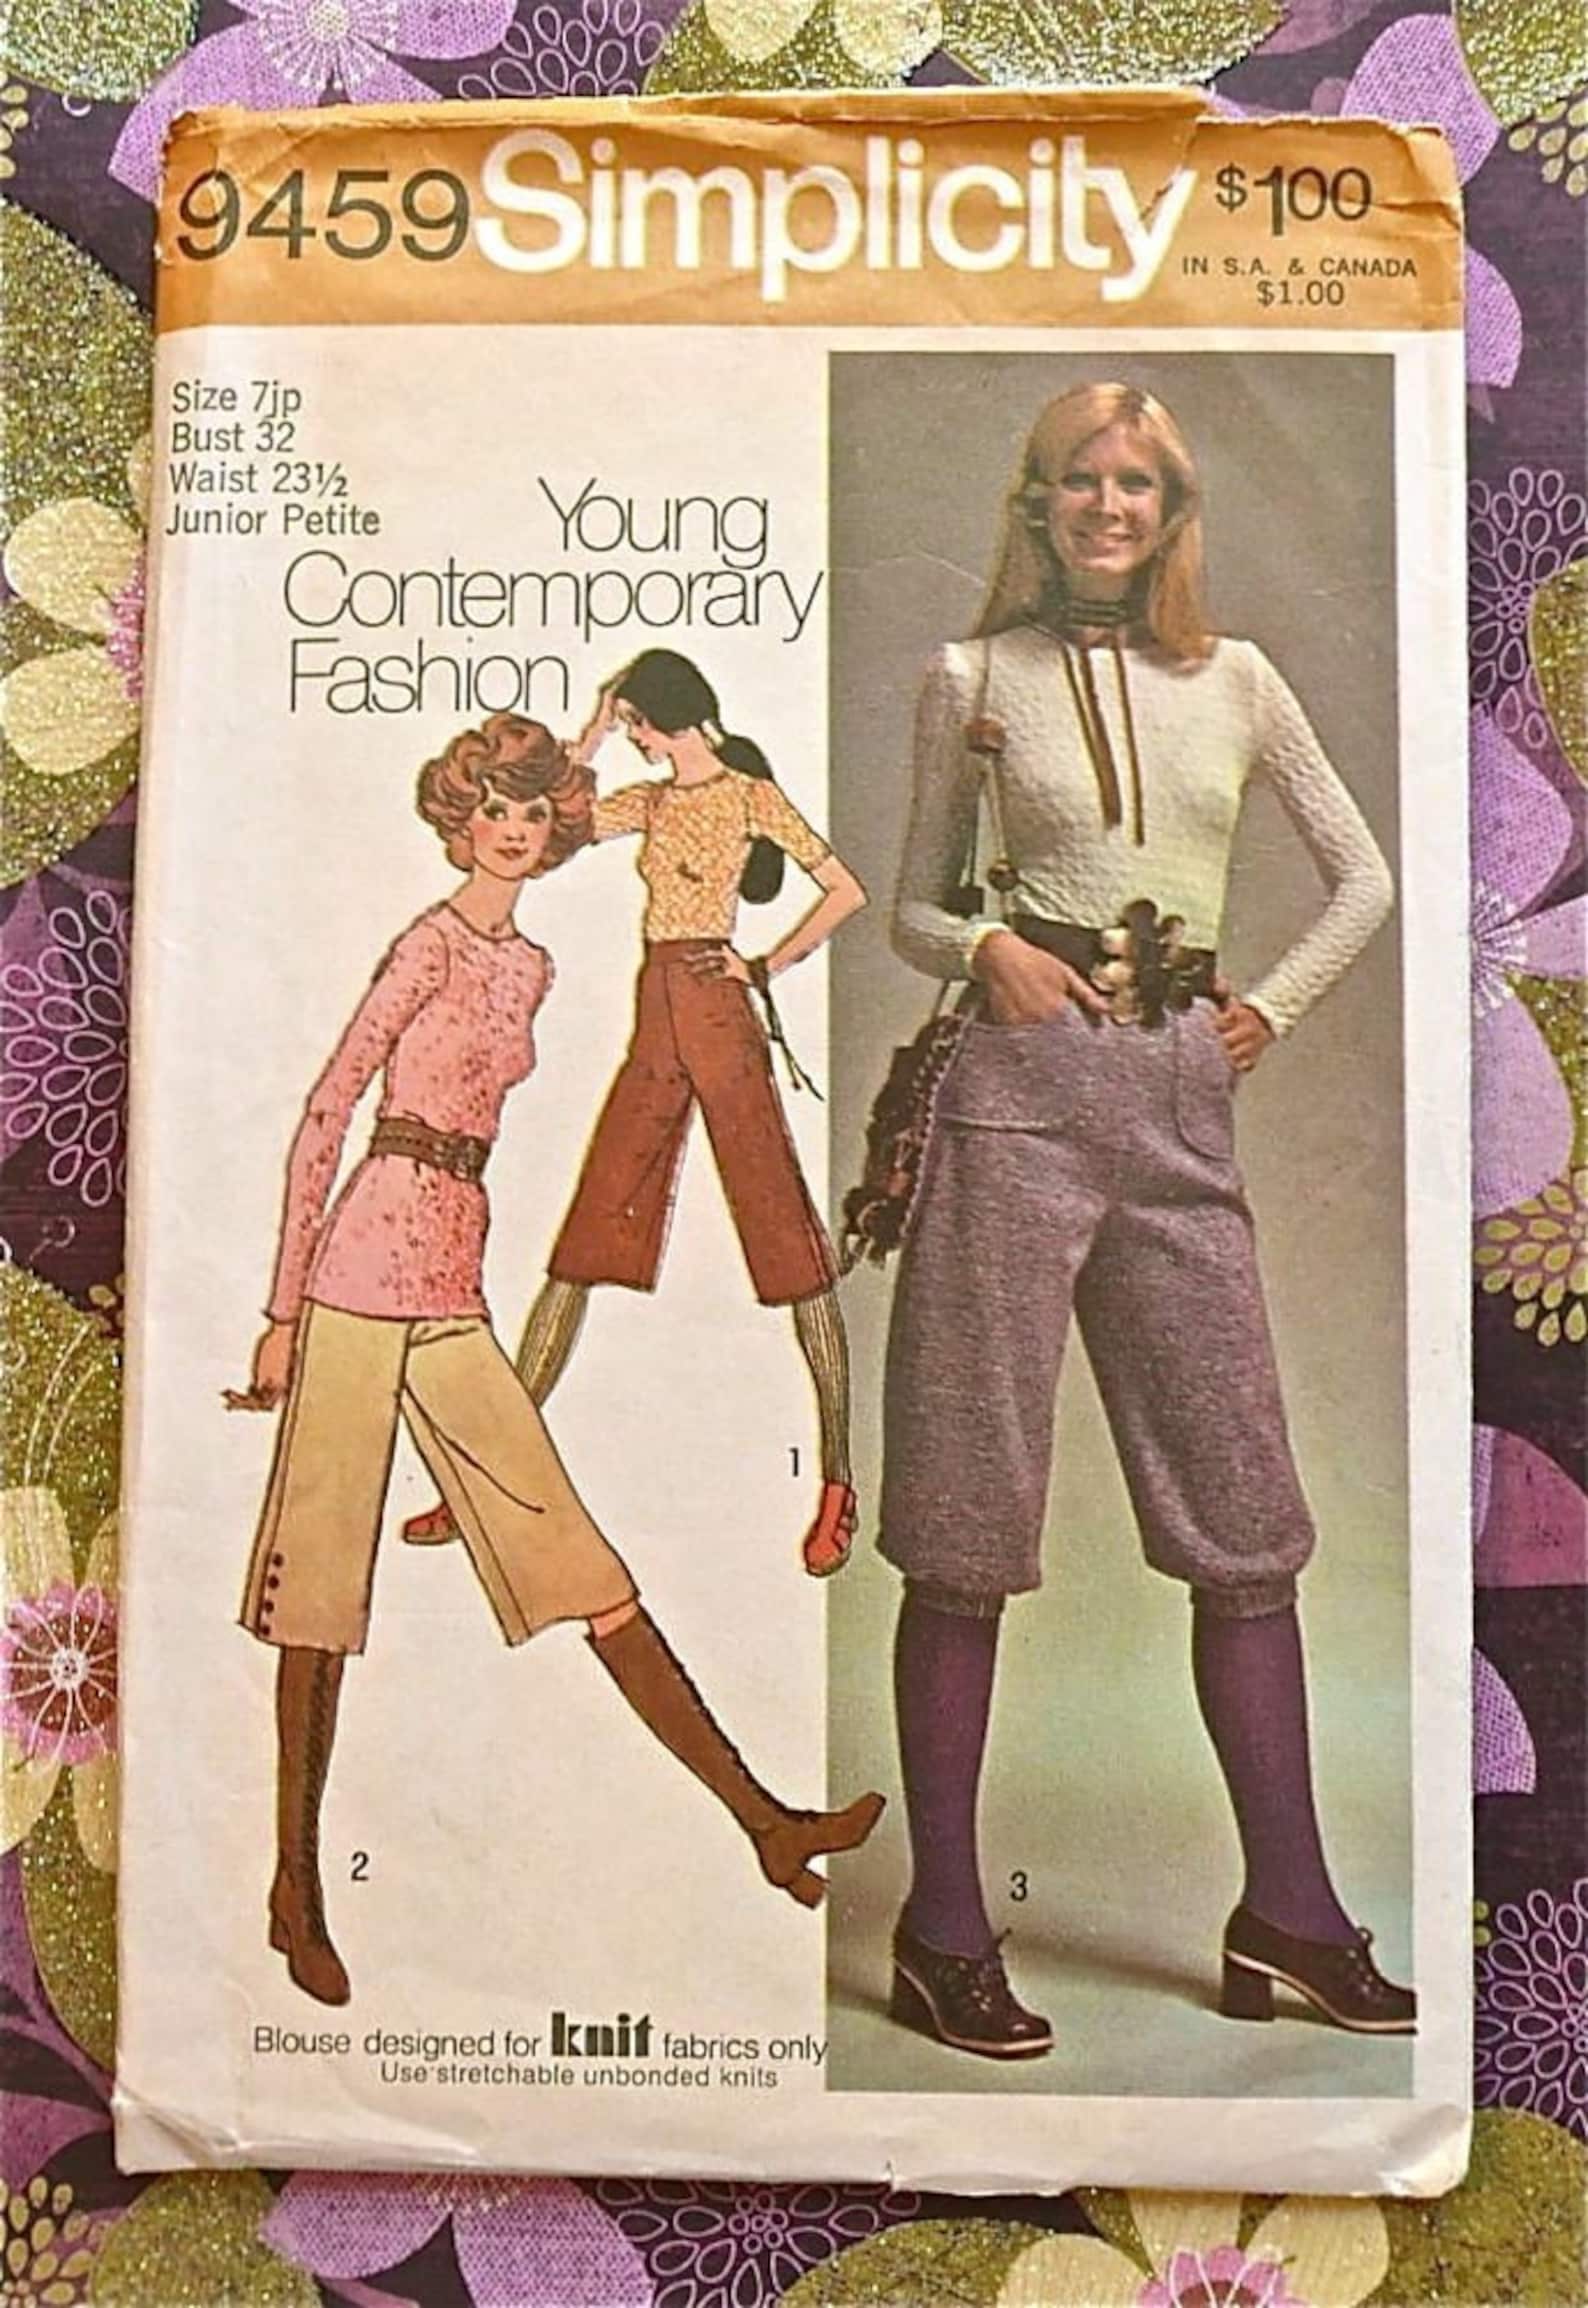 Capris or Pedal Pushers? Pants Vocabulary from 1971